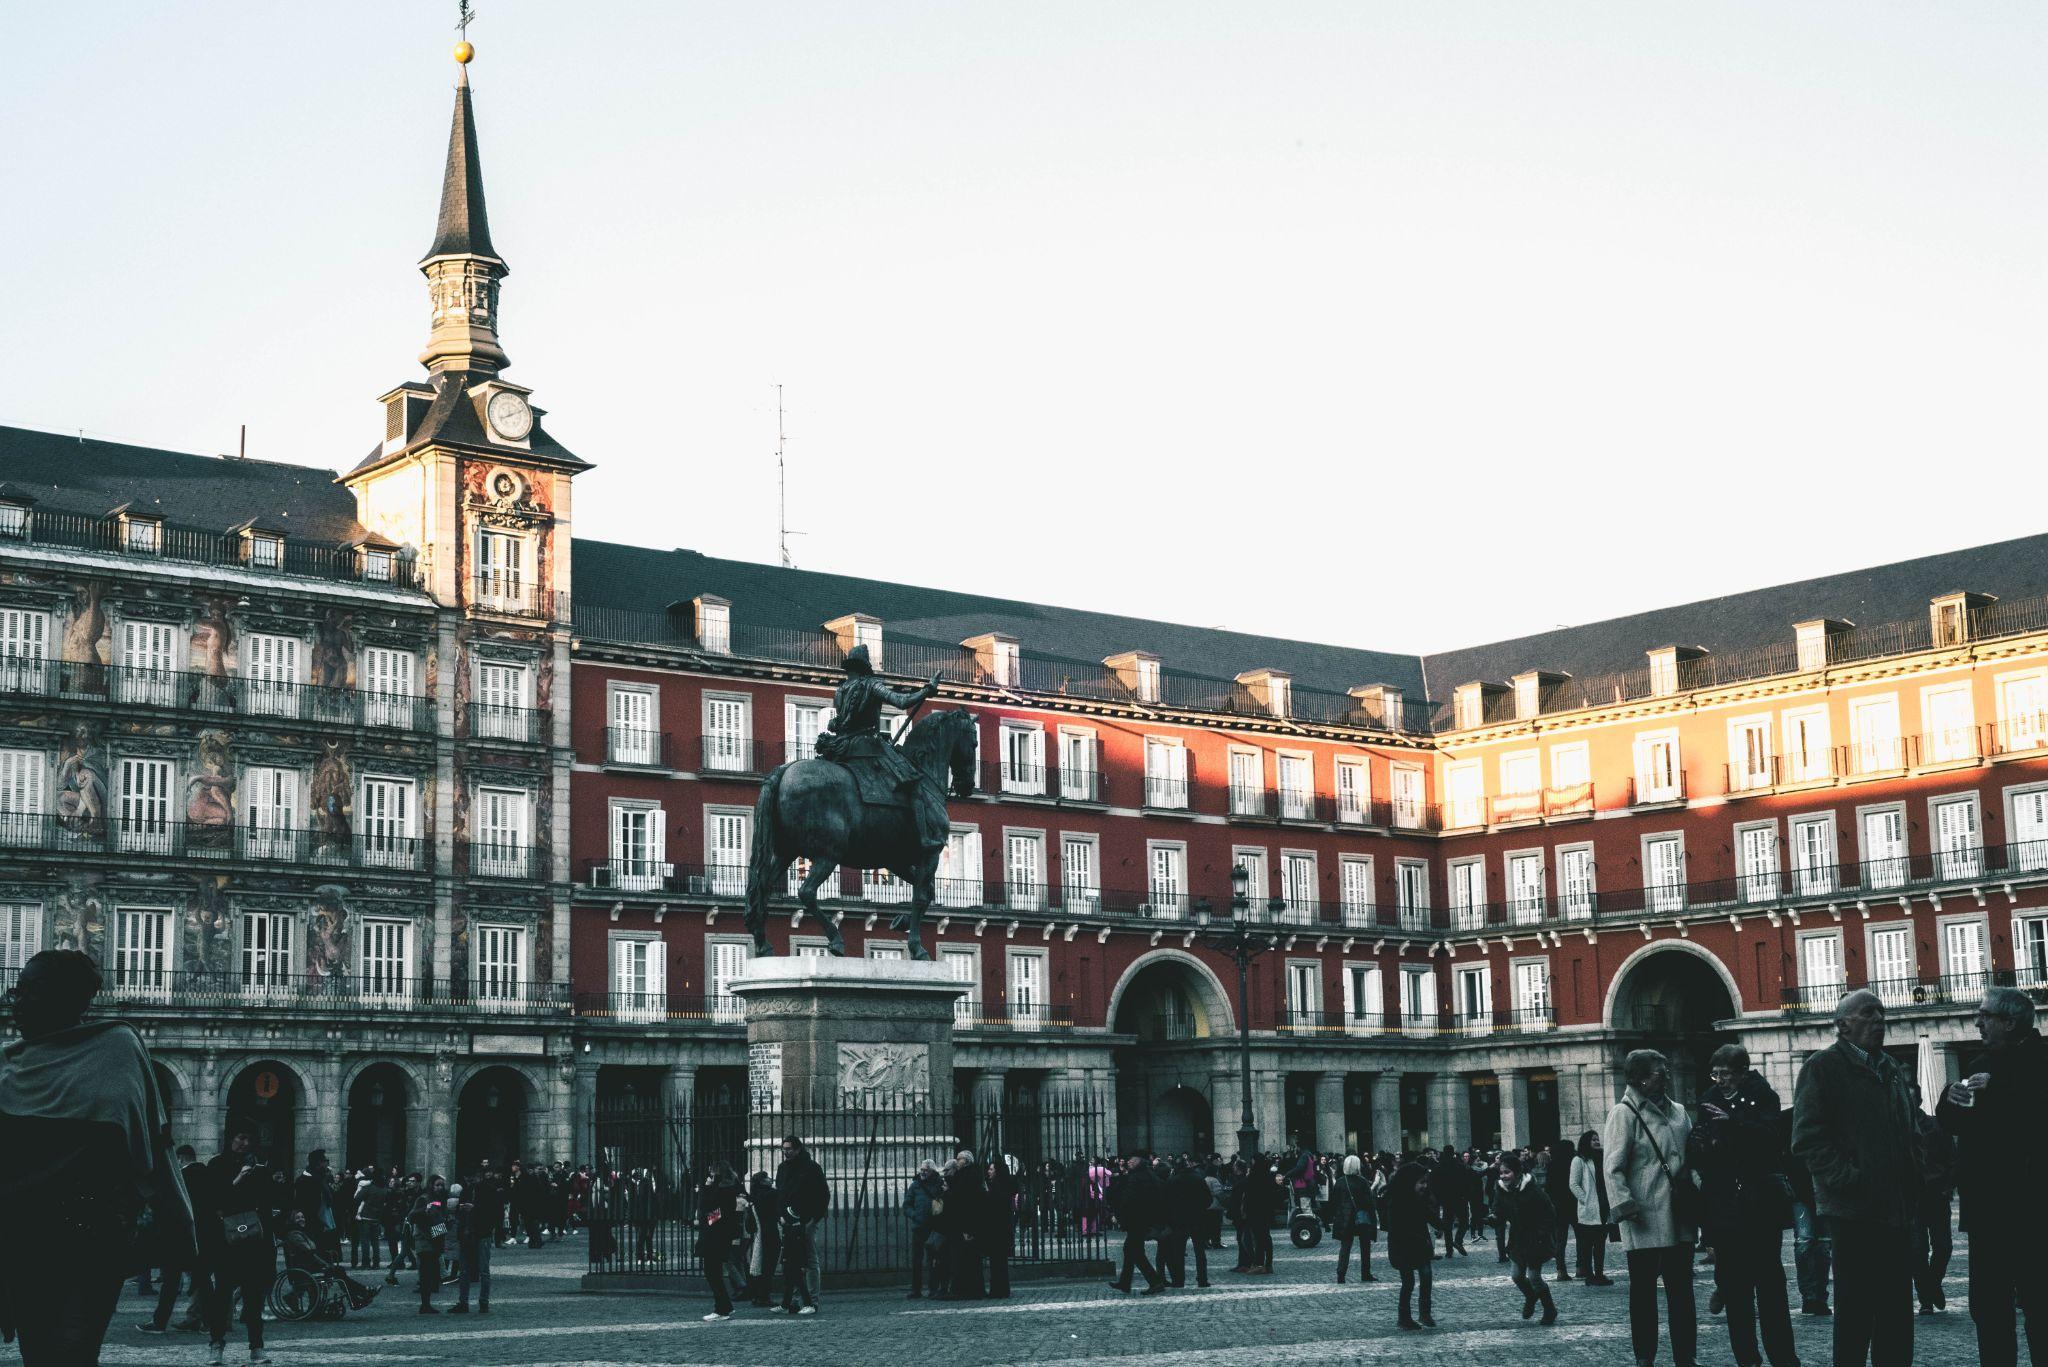 Photo of a plaza with a statue of a horse and rider outside the main building with many windows